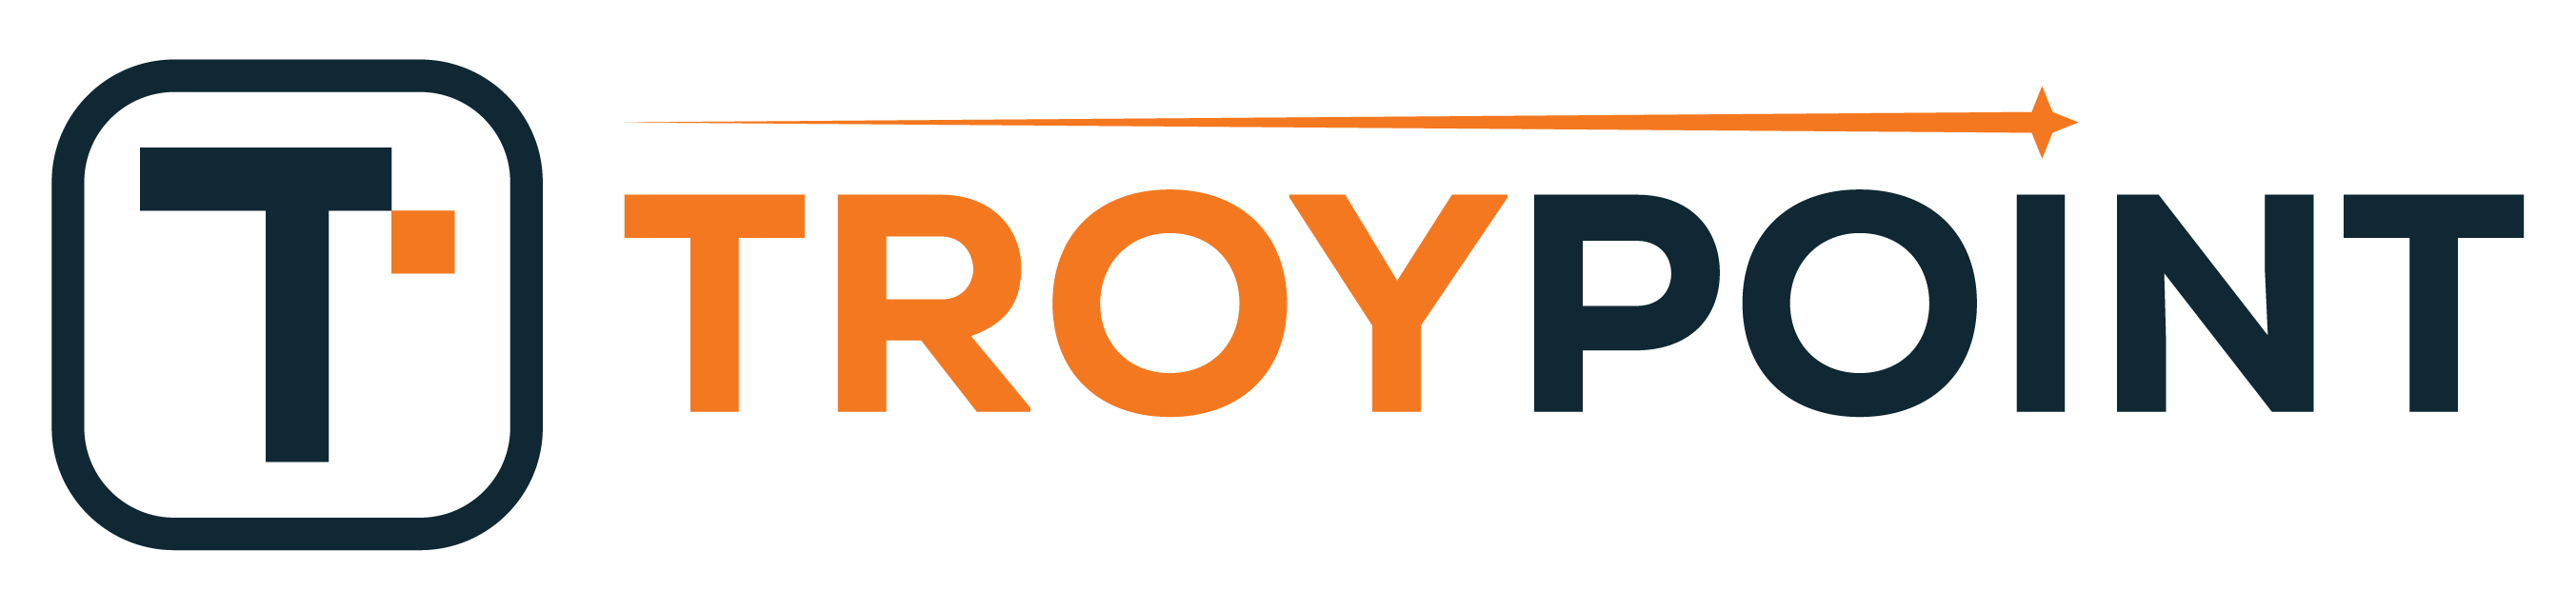 TROYPOINT Insider